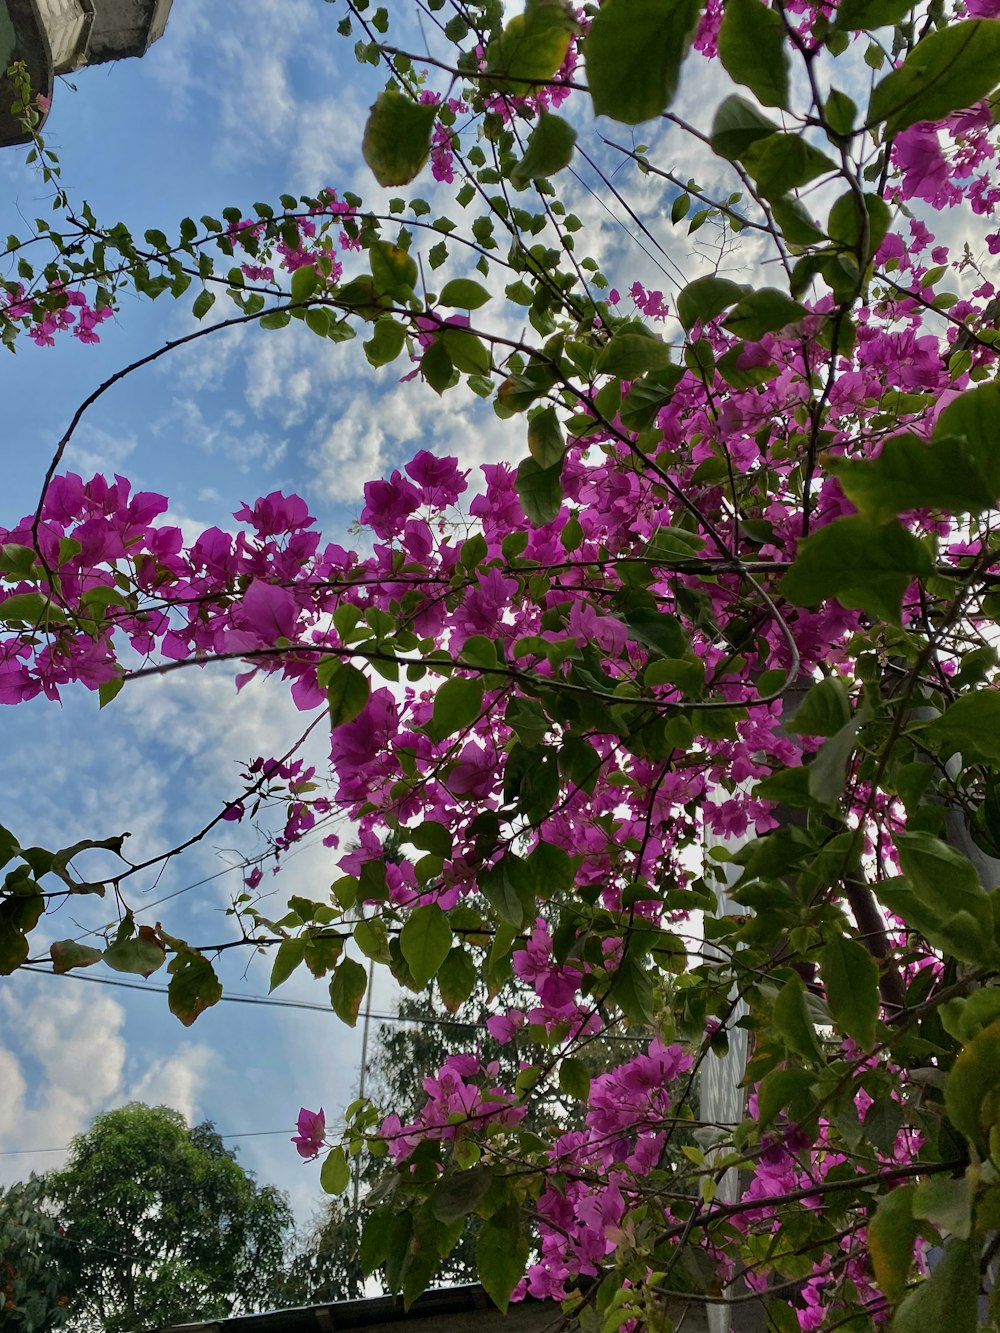 purple flowers are blooming on the branches of a tree